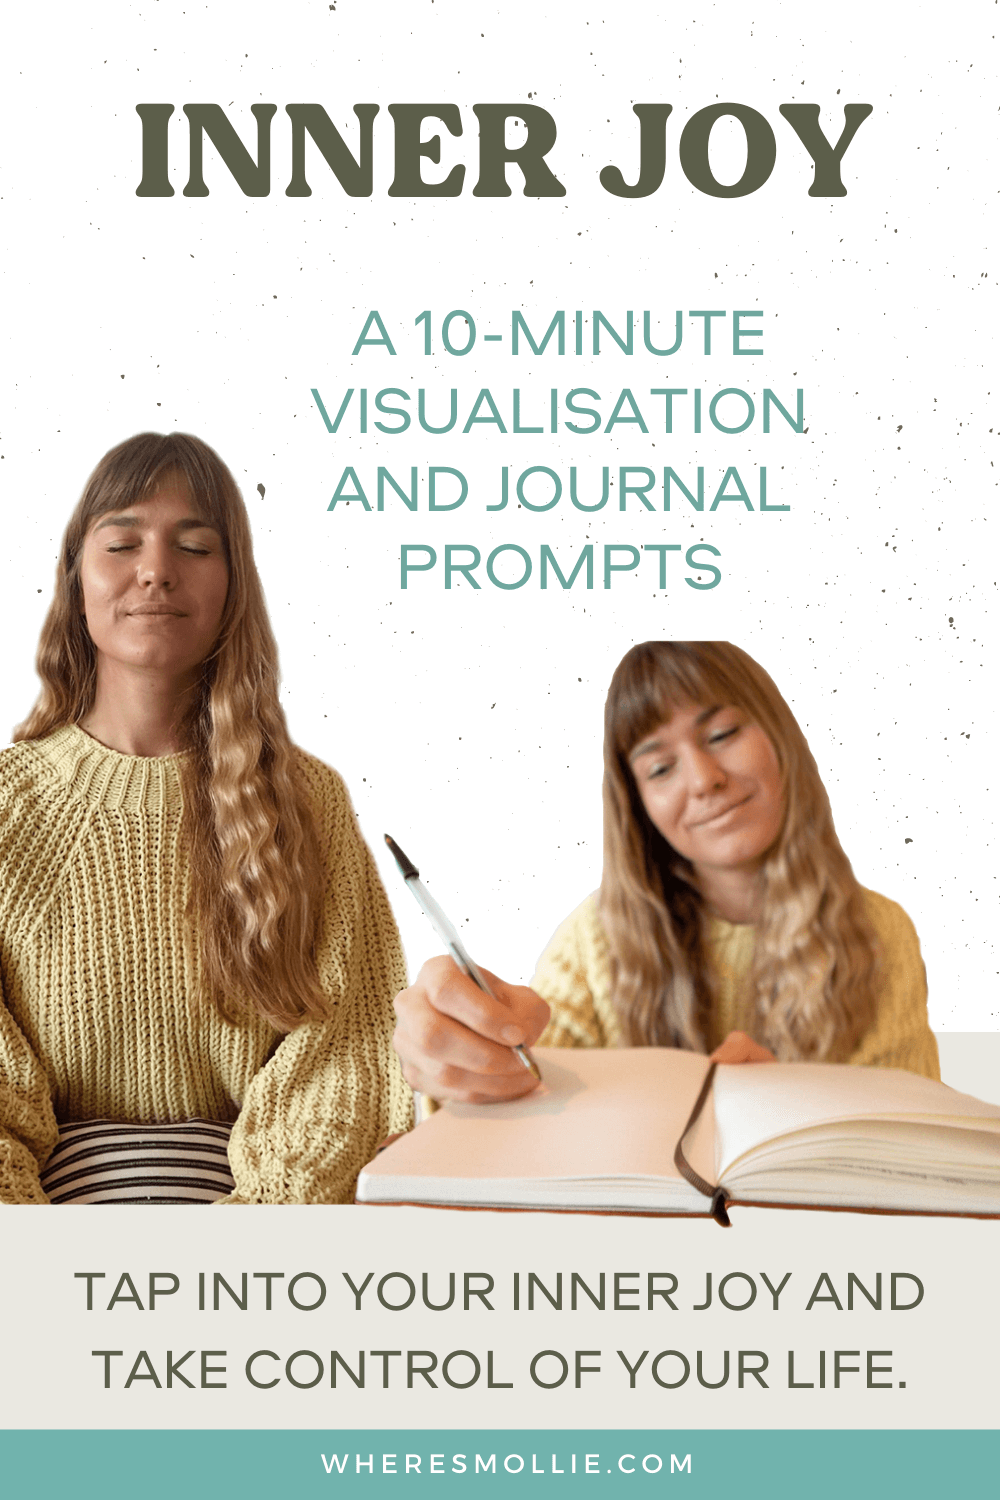 10-minute inner joy visualisation and journal prompts